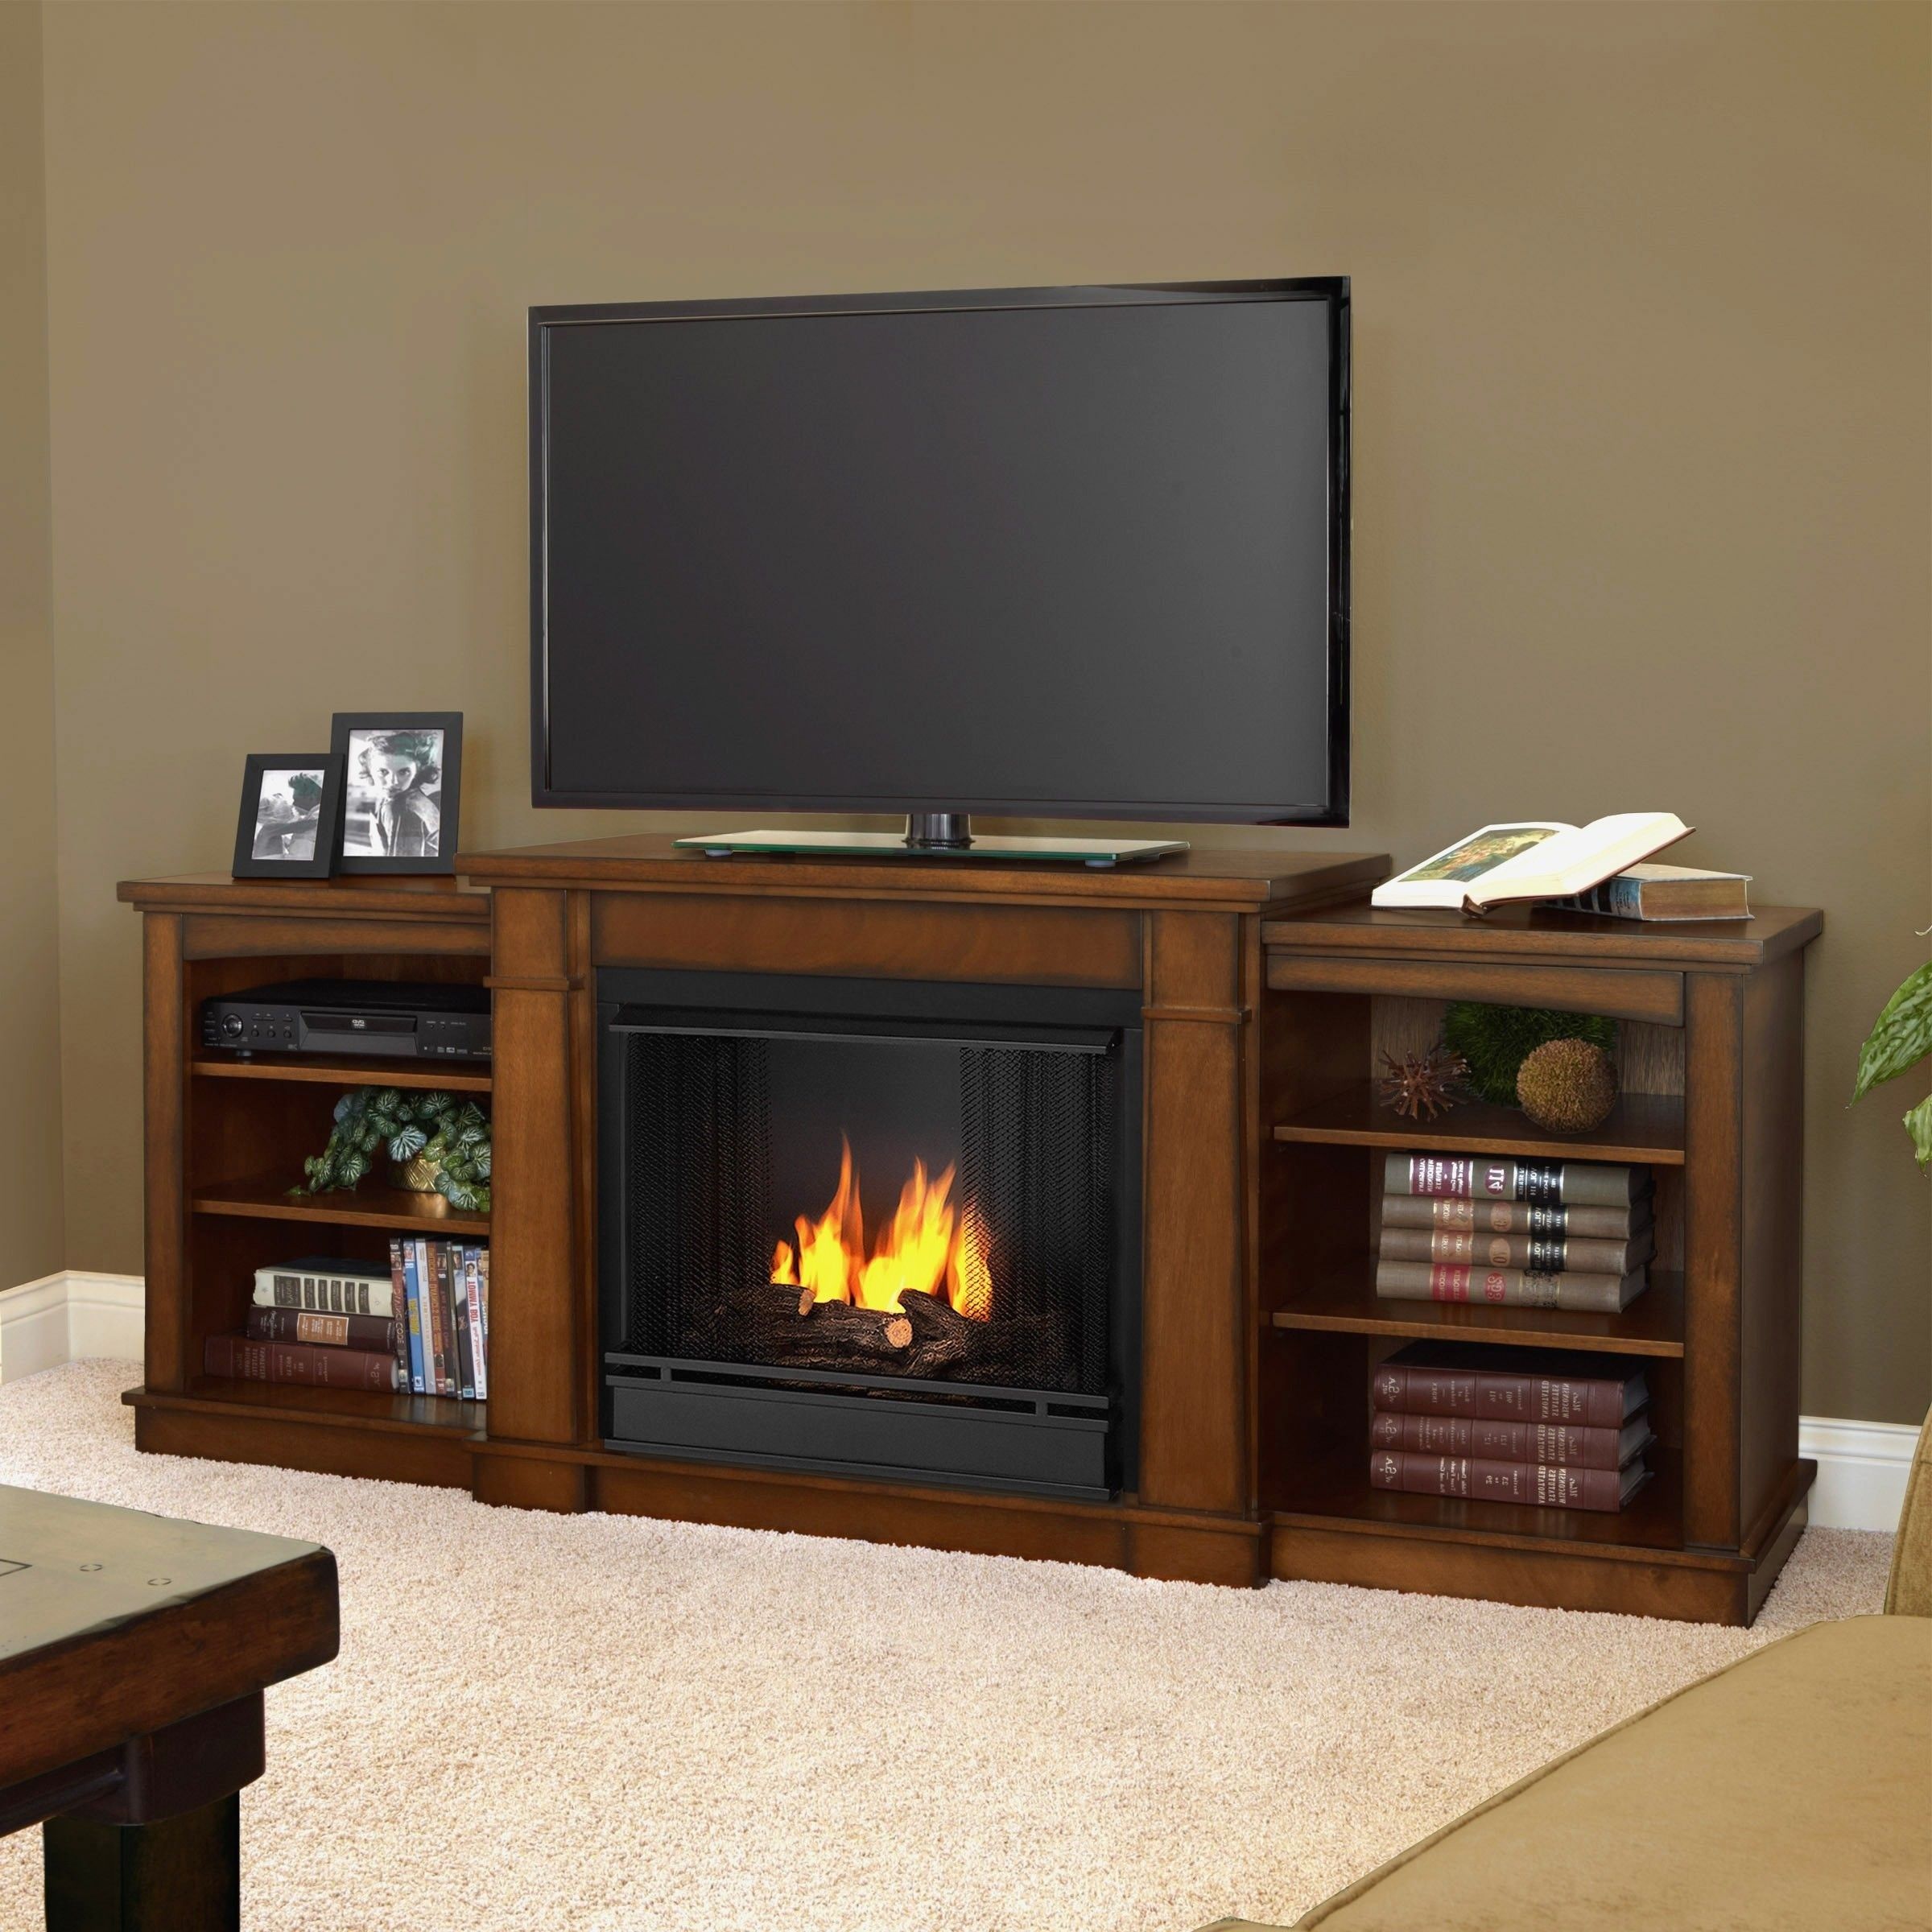 Fireplace Tv Stands For Flat Screens – Foter Inside Modern Fireplace Tv Stands (View 15 of 20)